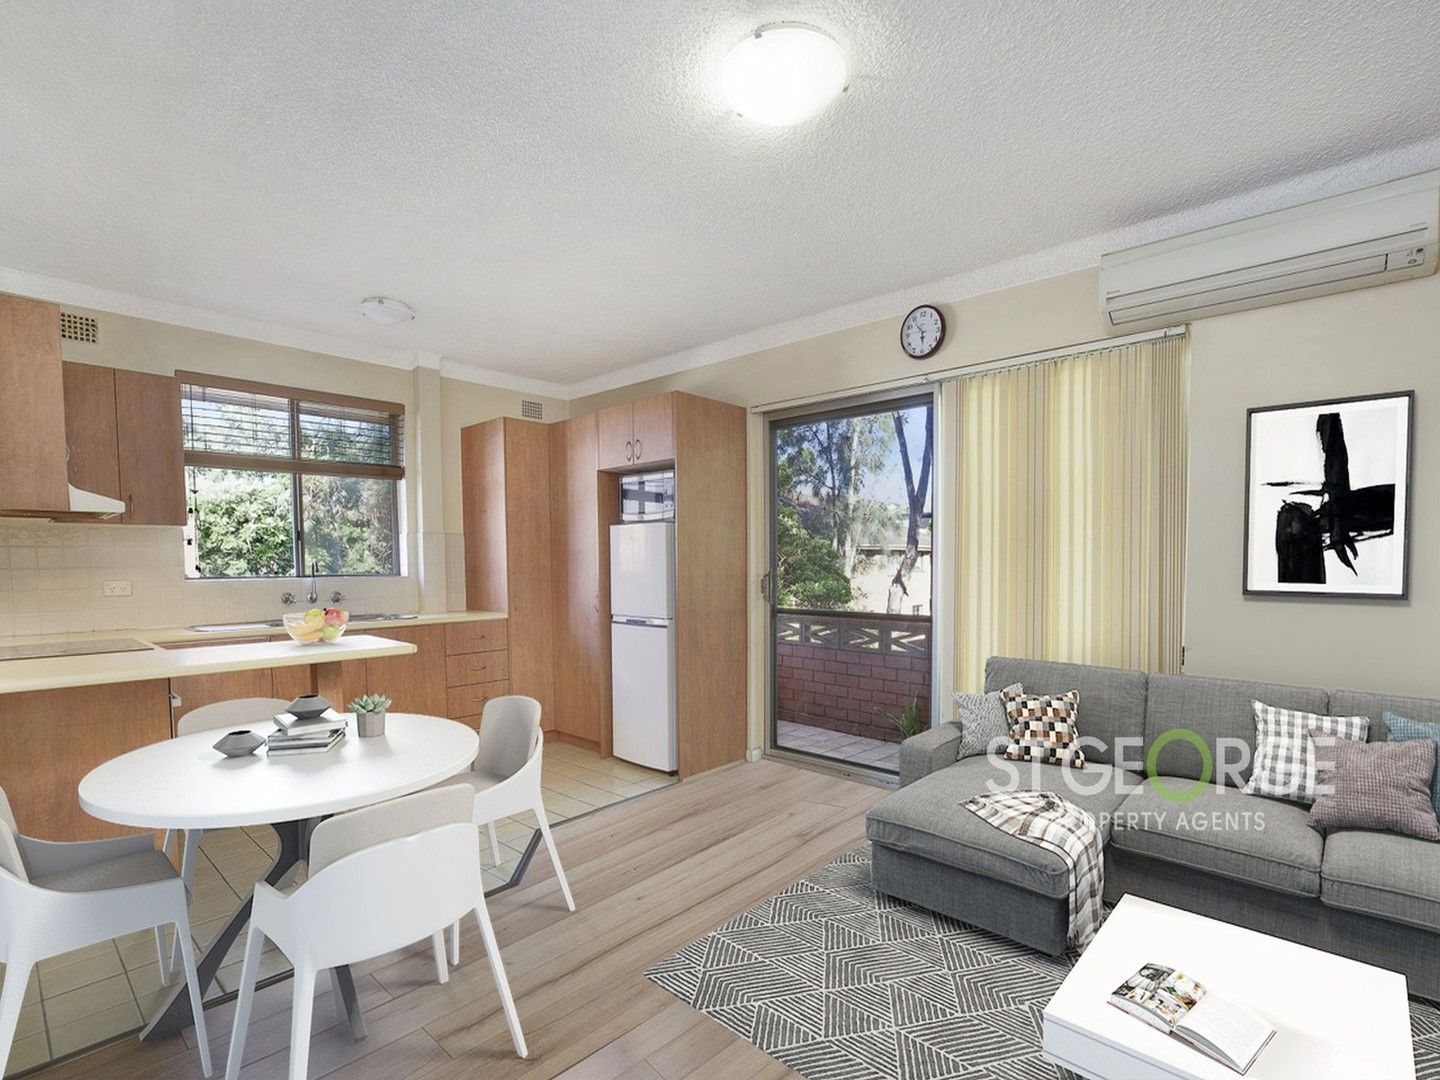 1 bedrooms Apartment / Unit / Flat in 9/45 Station Street MORTDALE NSW, 2223